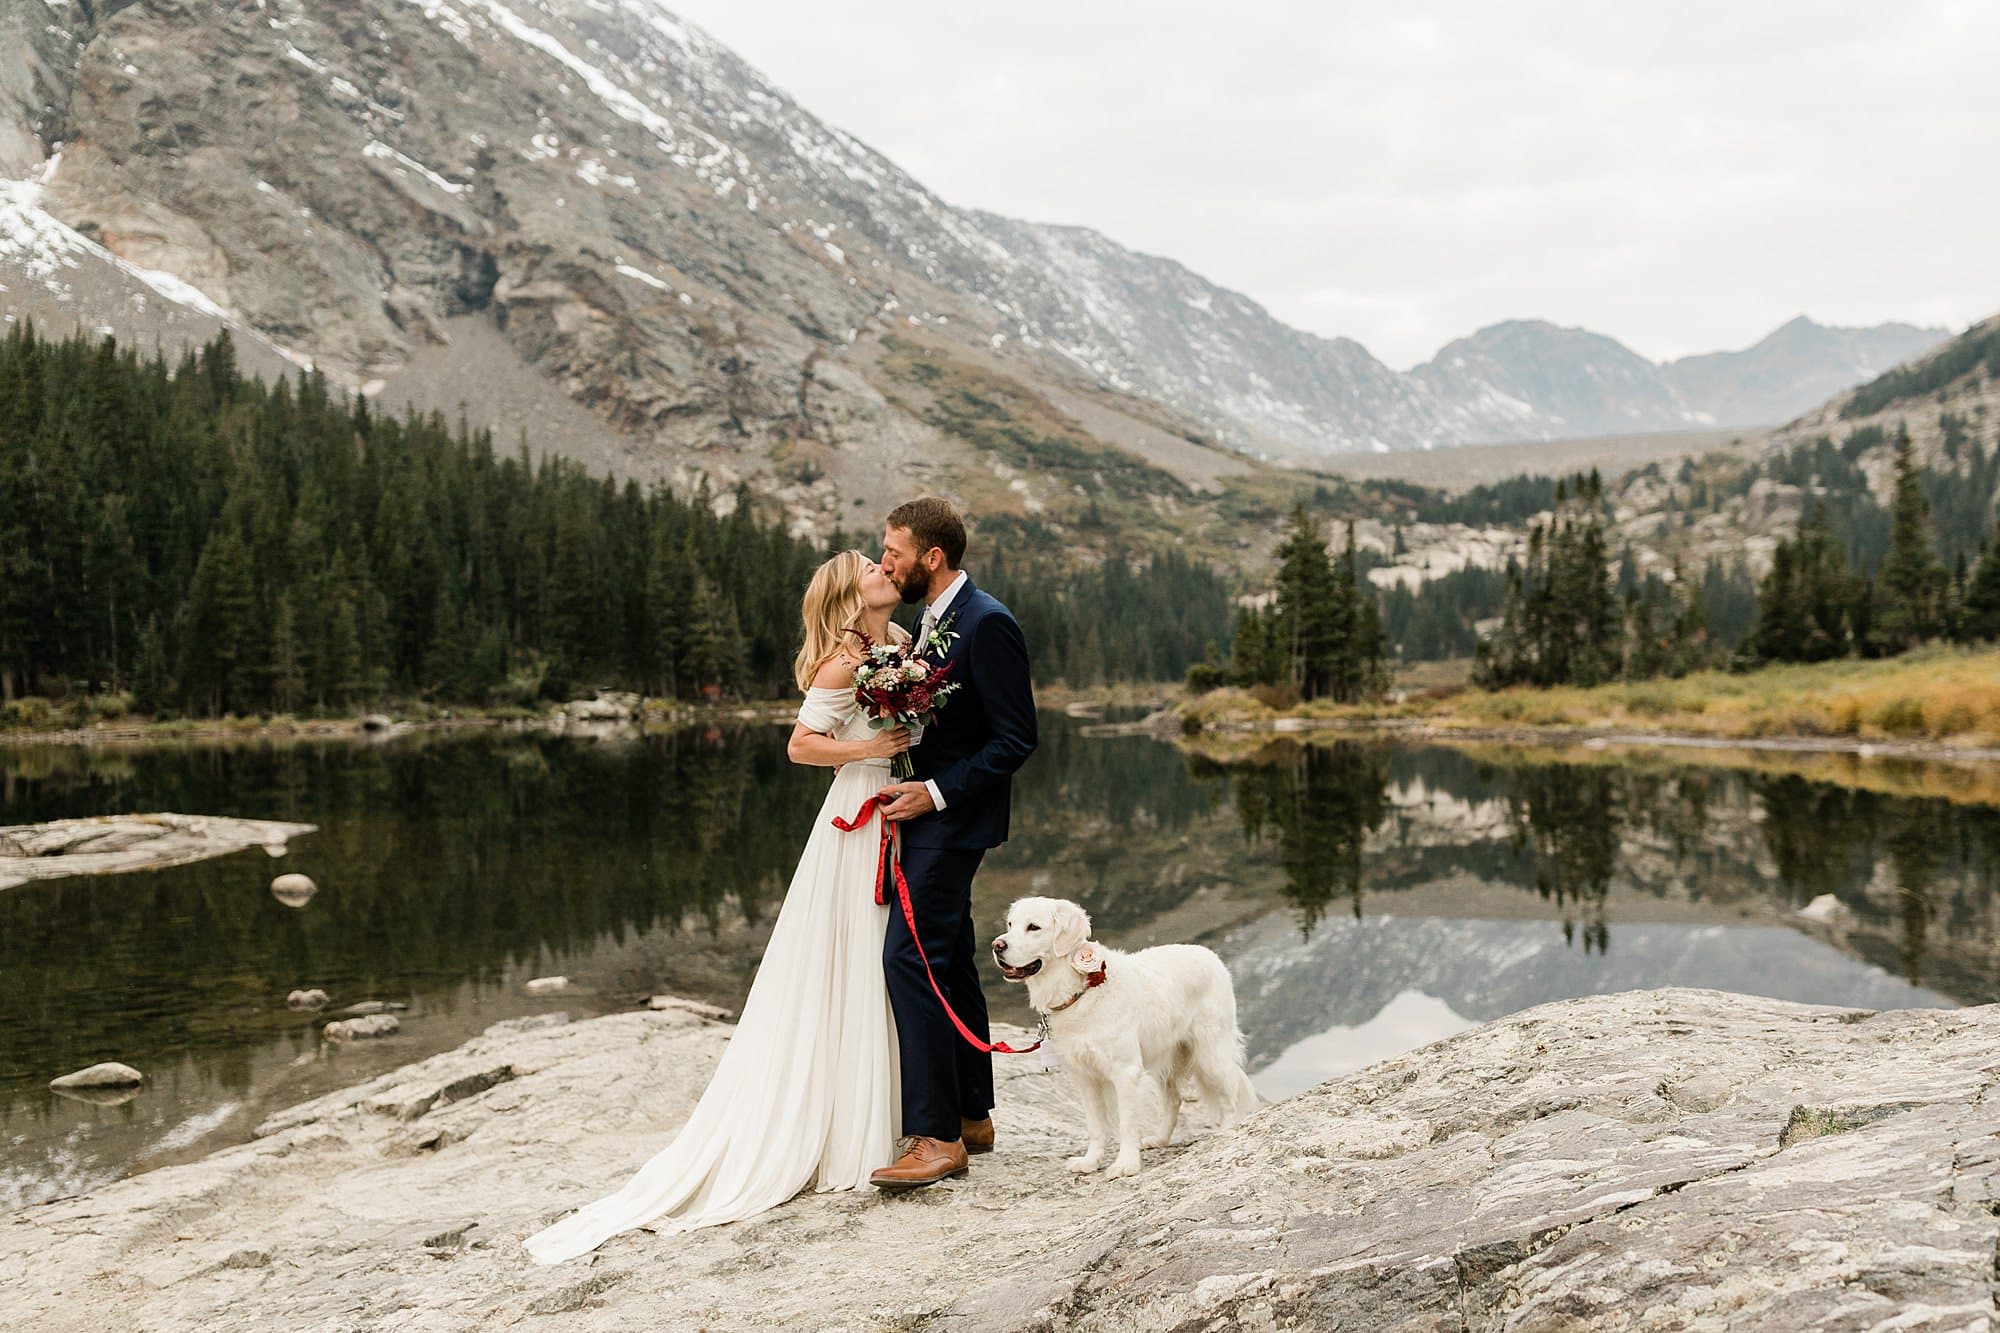 A couple kisses in front of Blue Lakes during their elopement in Colorado